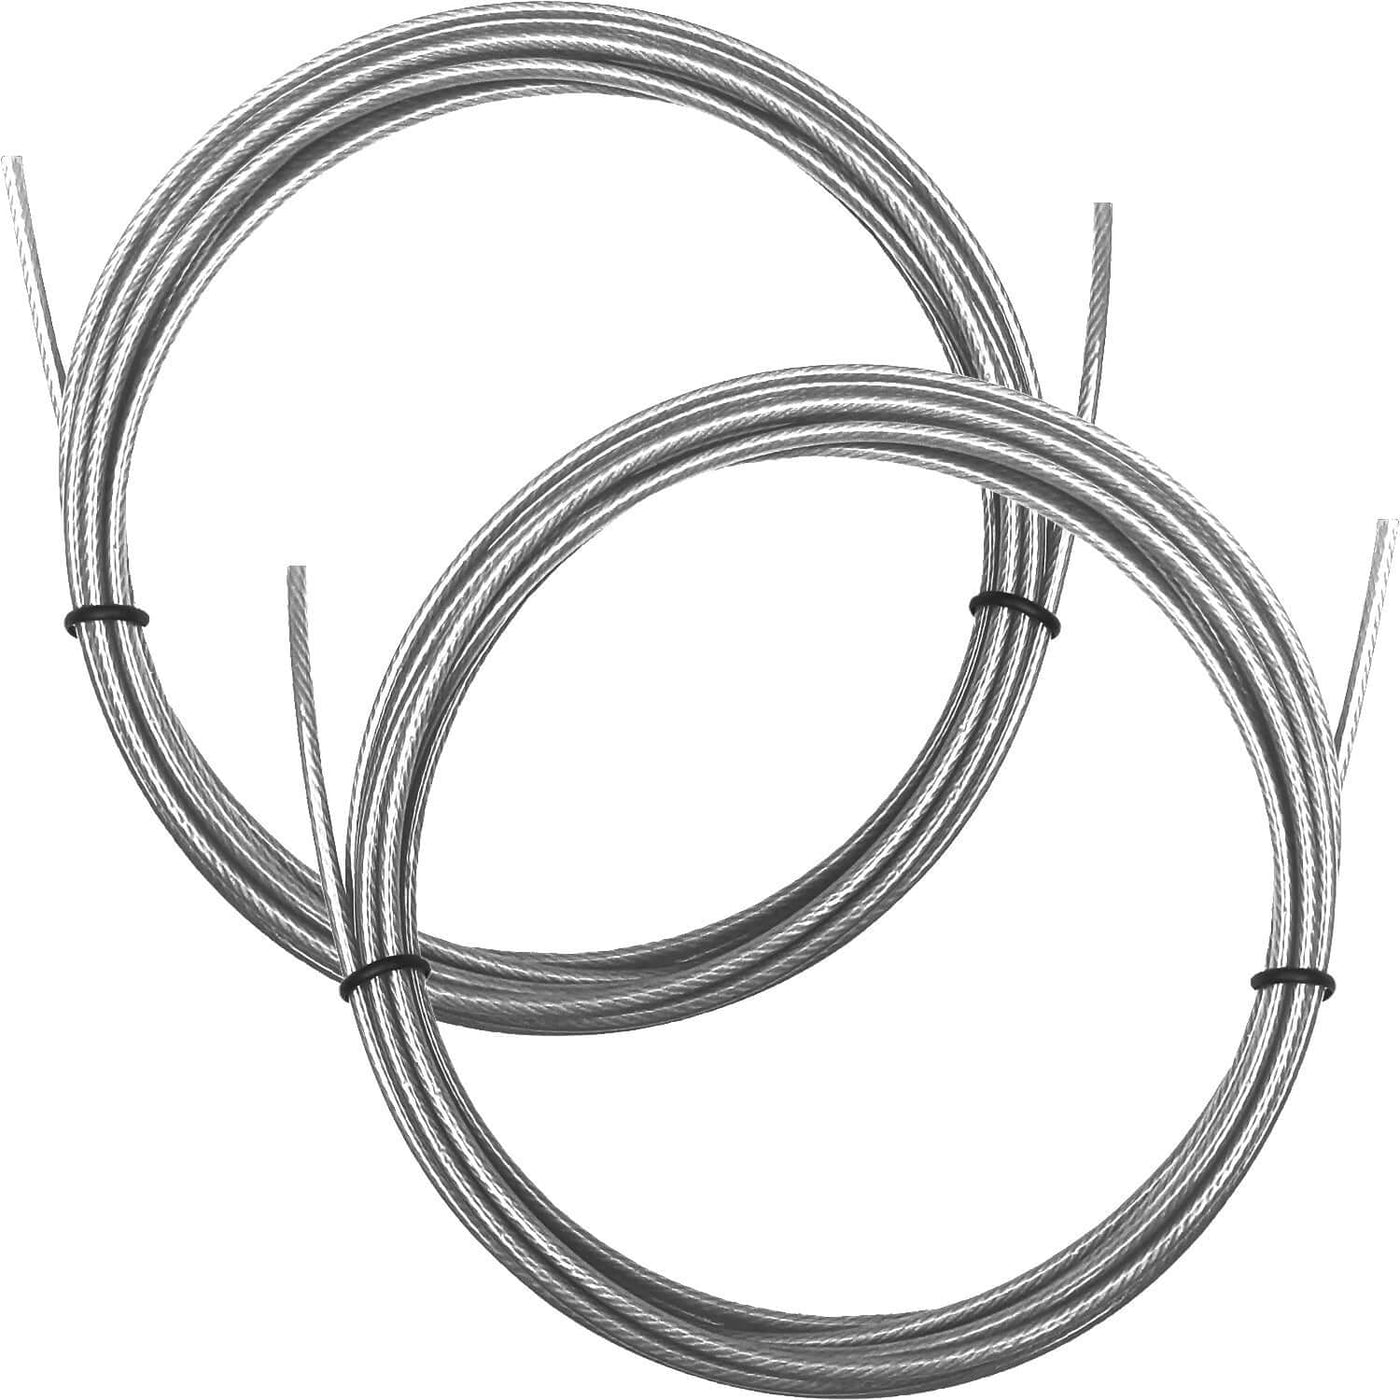 Murgs Replacement Skipping Rope Cable 2.5mm Silver 2 Pack